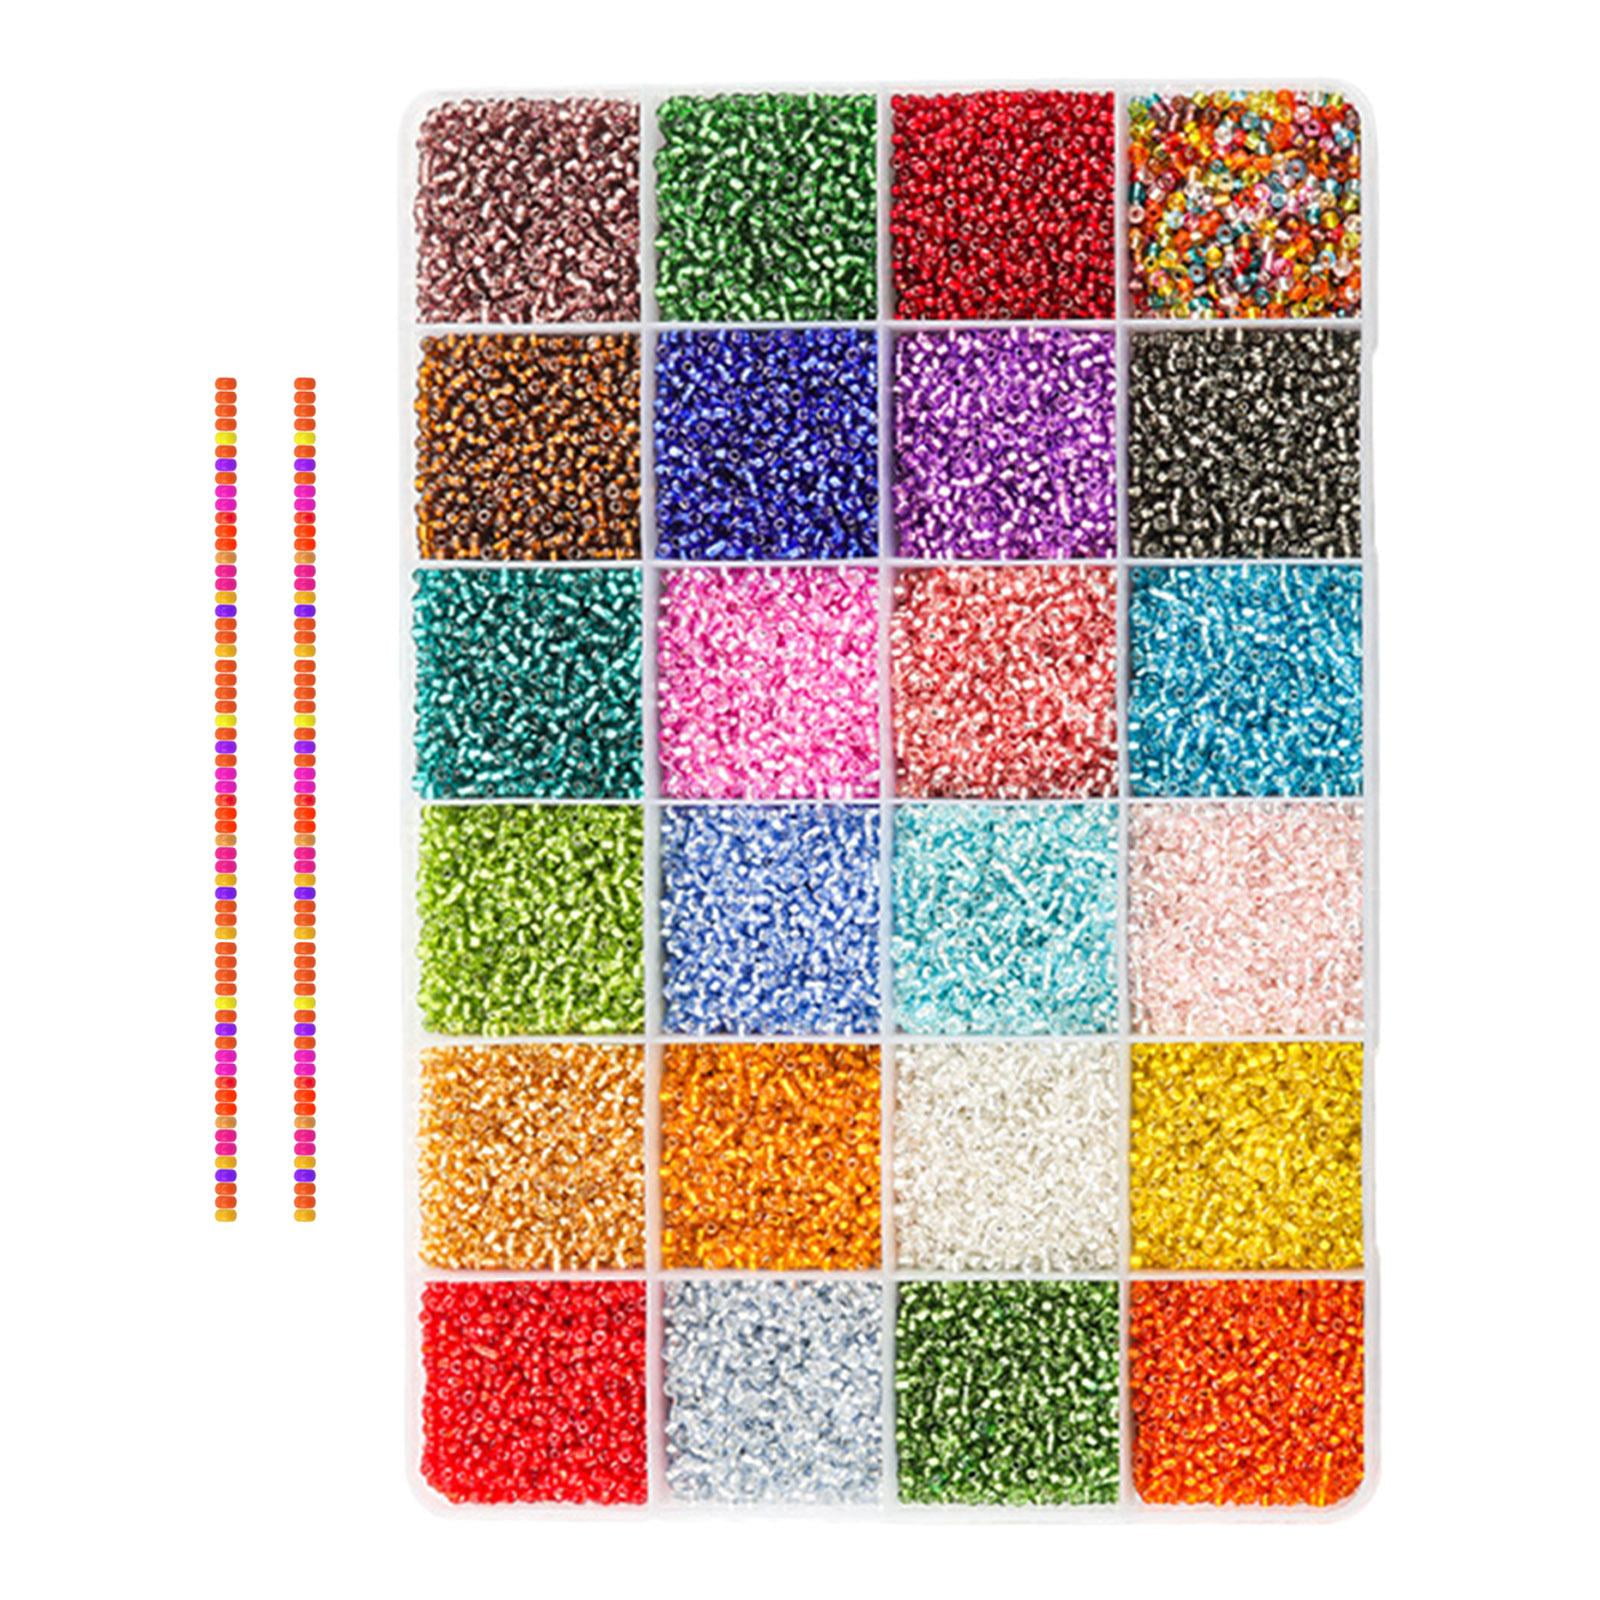 35000pcs 2mm Glass Seed Beads For Jewelry Making Small Bead Craft